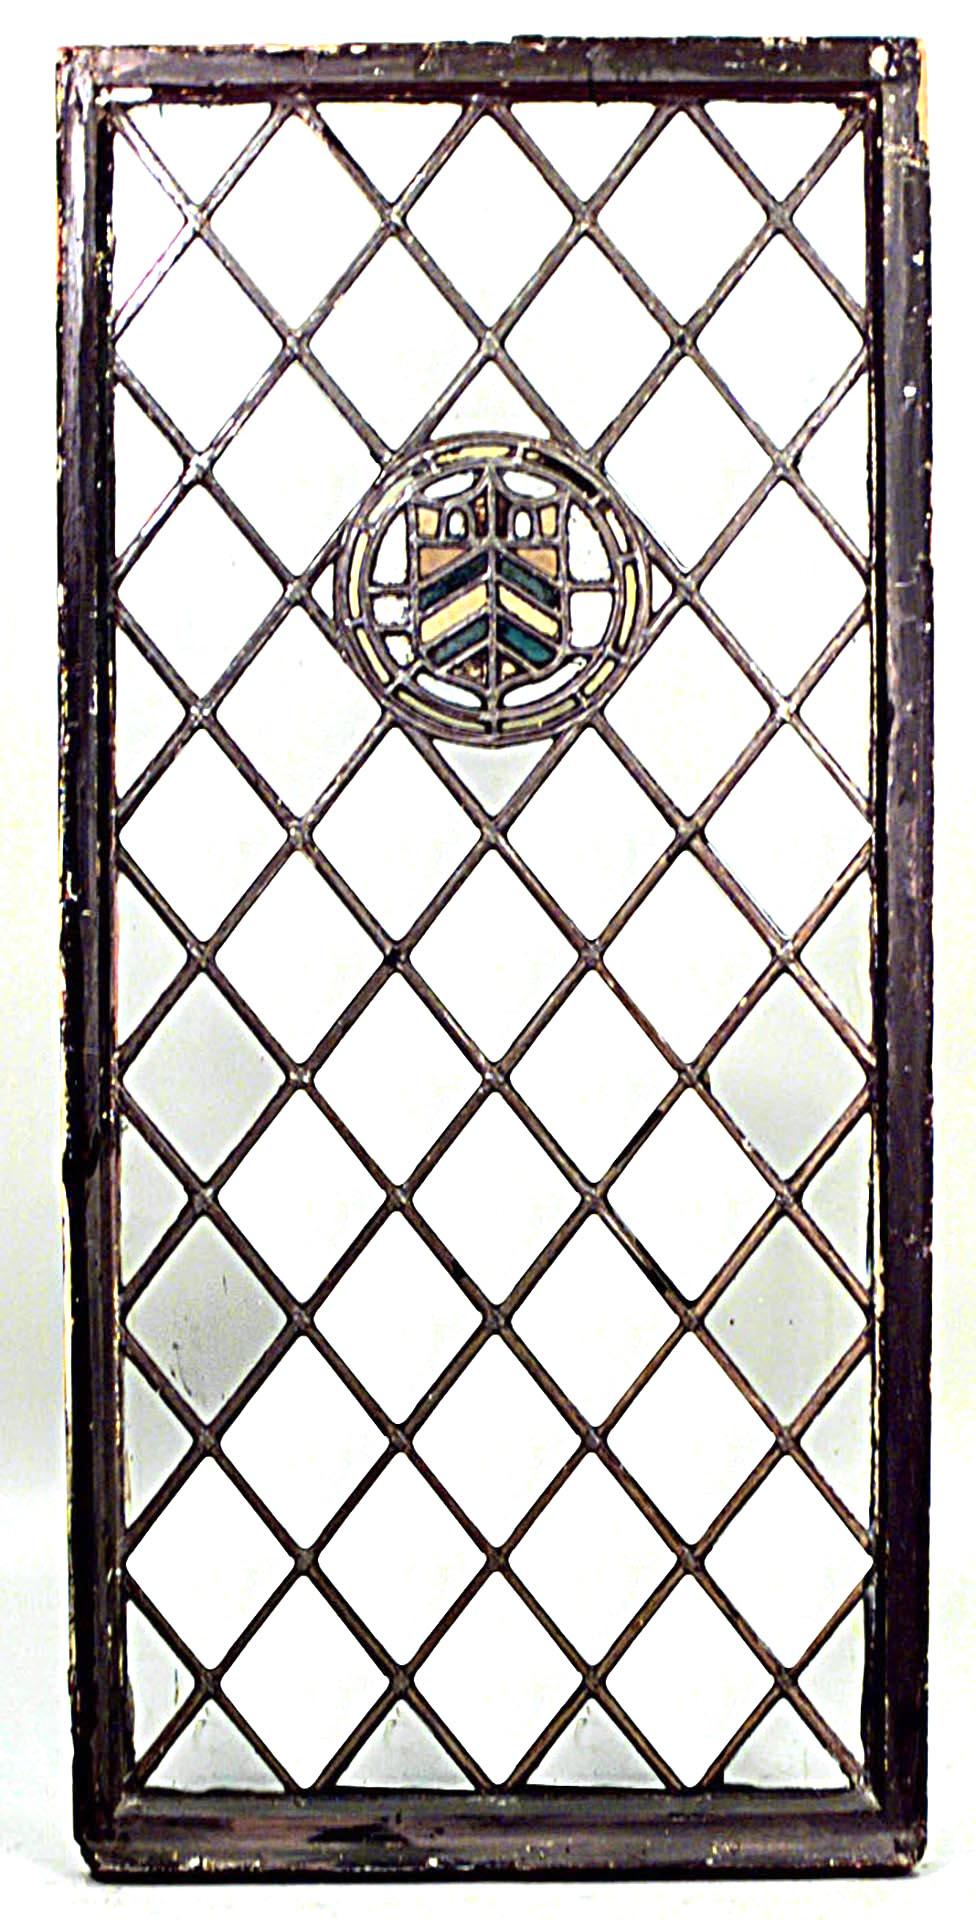 Pair of English Renaissance style (19th Century) large leaded glass window panels with center medallion.
